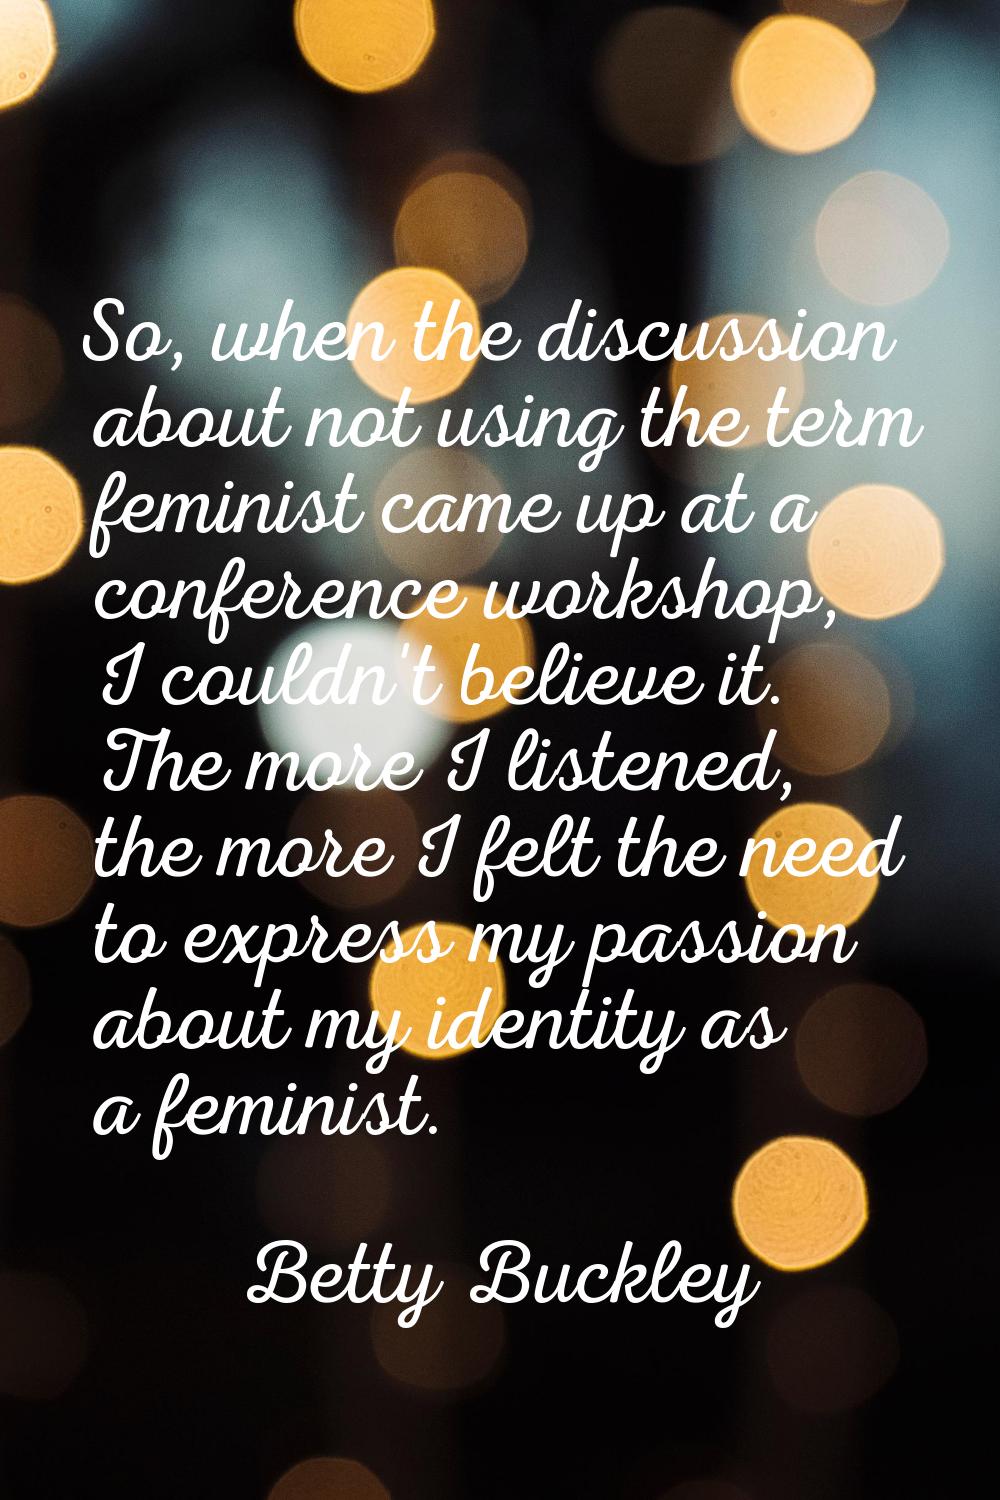 So, when the discussion about not using the term feminist came up at a conference workshop, I could